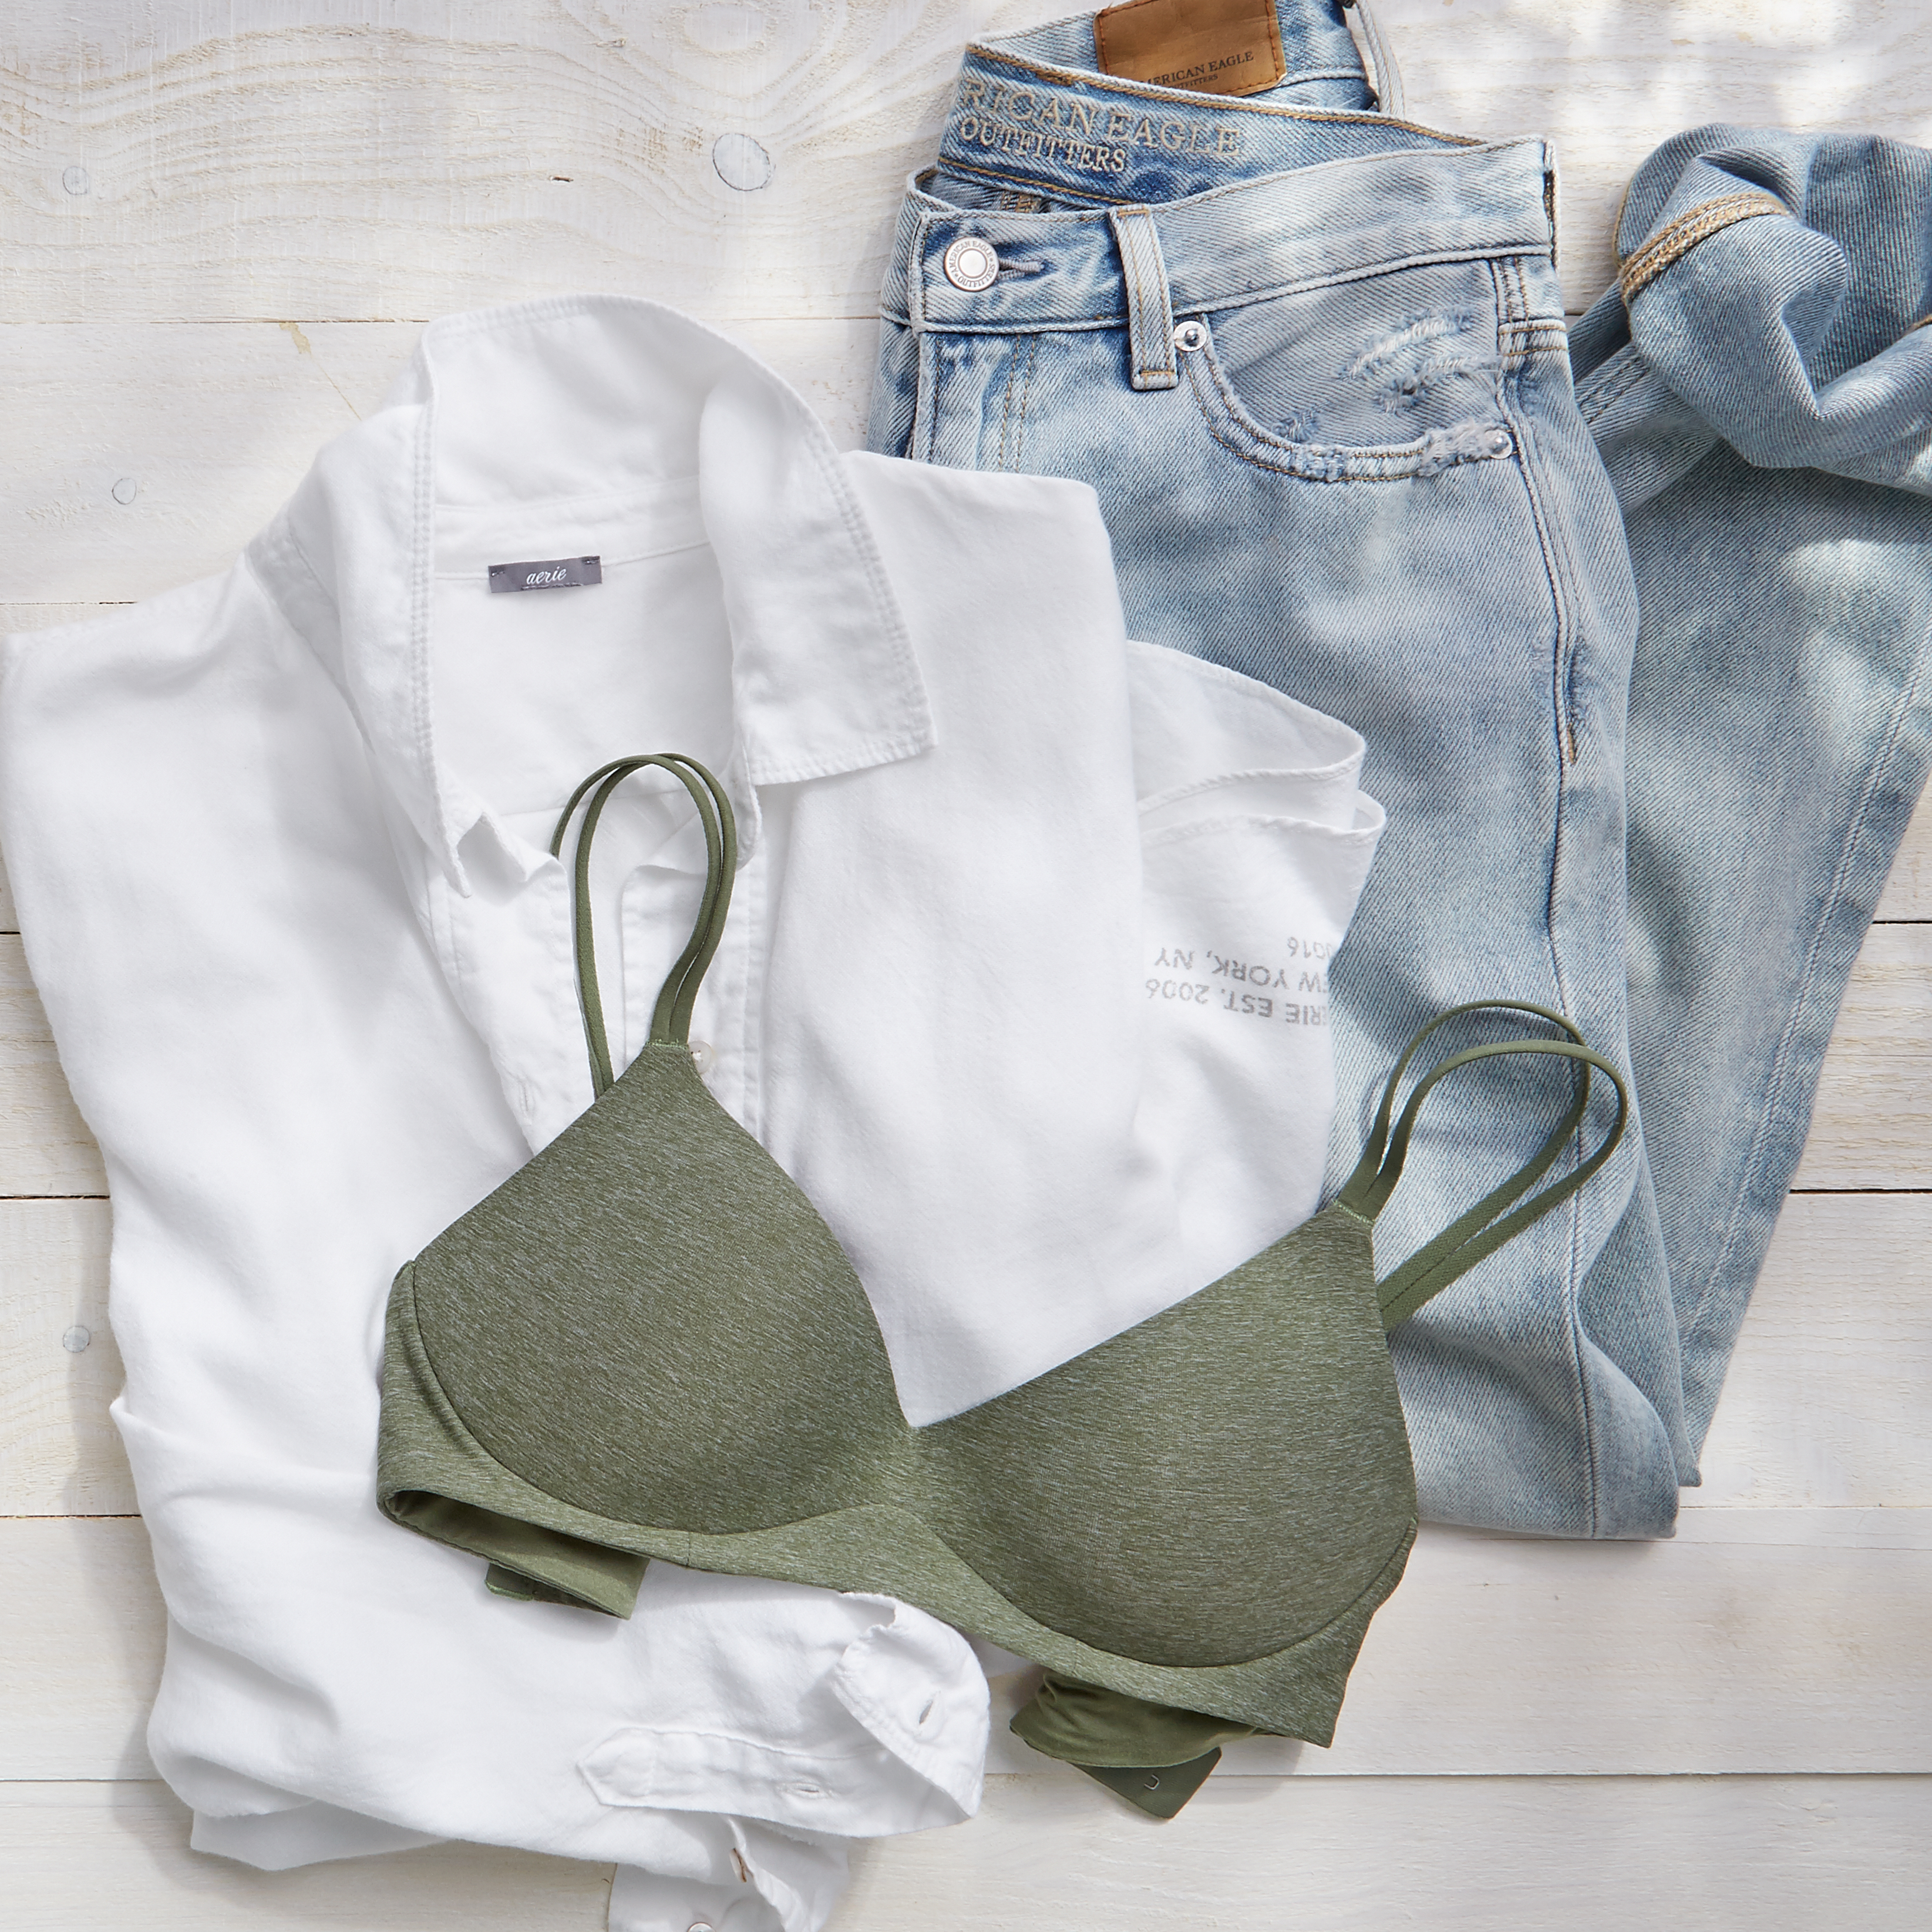 Aerie - Our dreamiest t-shirt bra EVER… meet the new Real Sunnie Wireless  Push Up! Hear from designer Lauren about why we knew we had to add a little  push to your